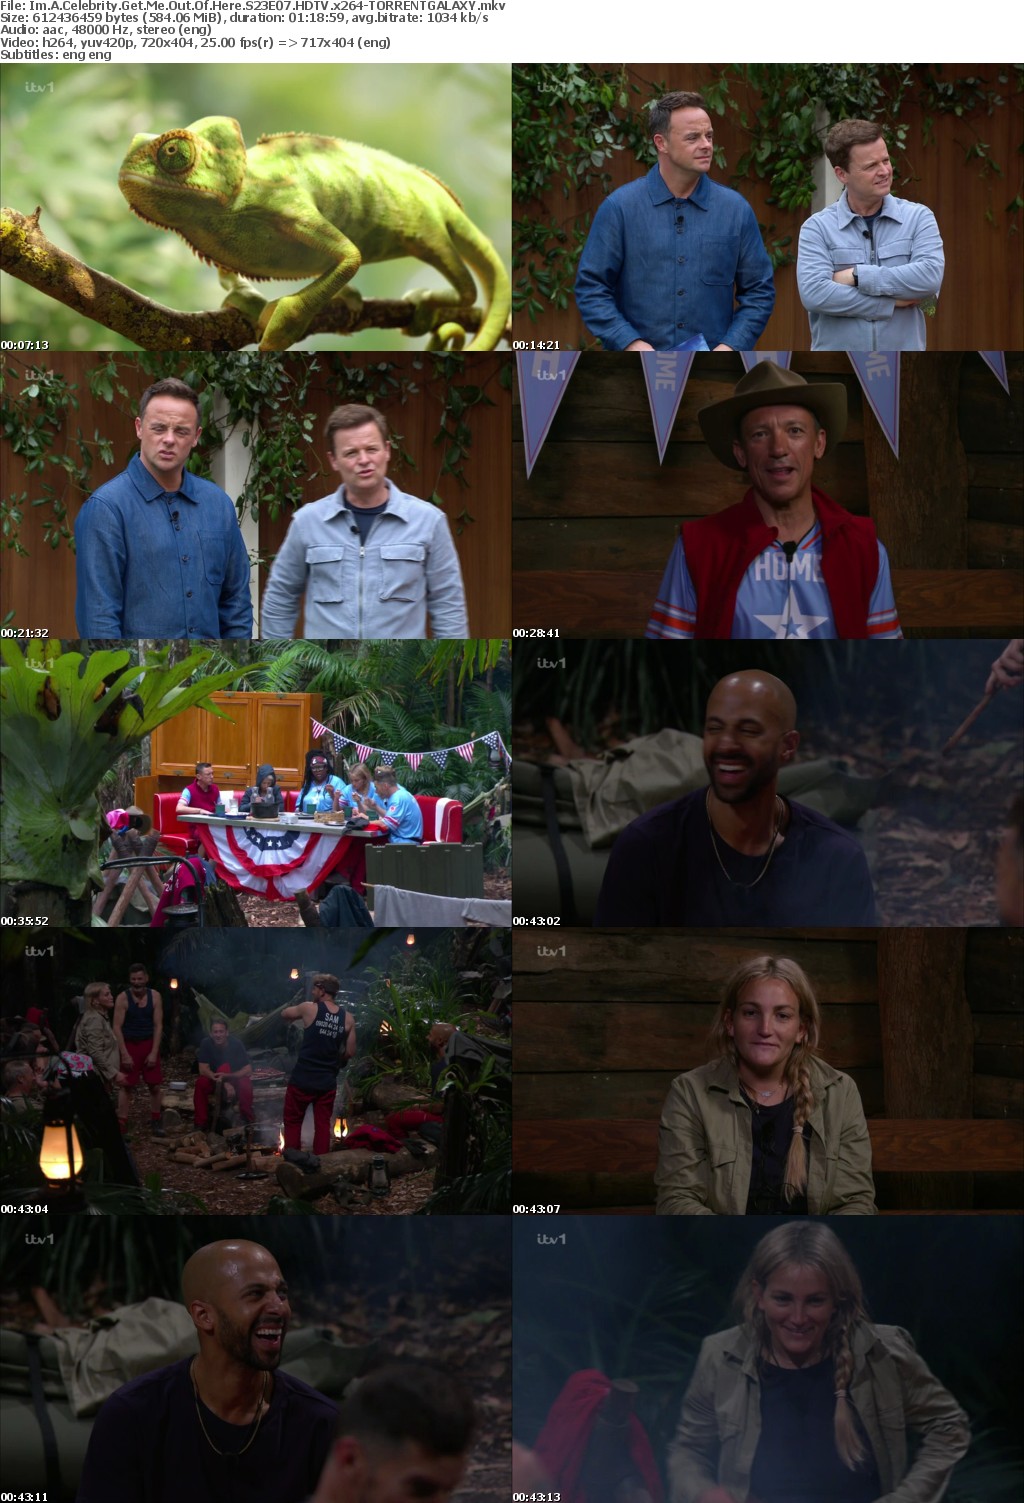 Im A Celebrity Get Me Out Of Here S23E07 HDTV x264-GALAXY